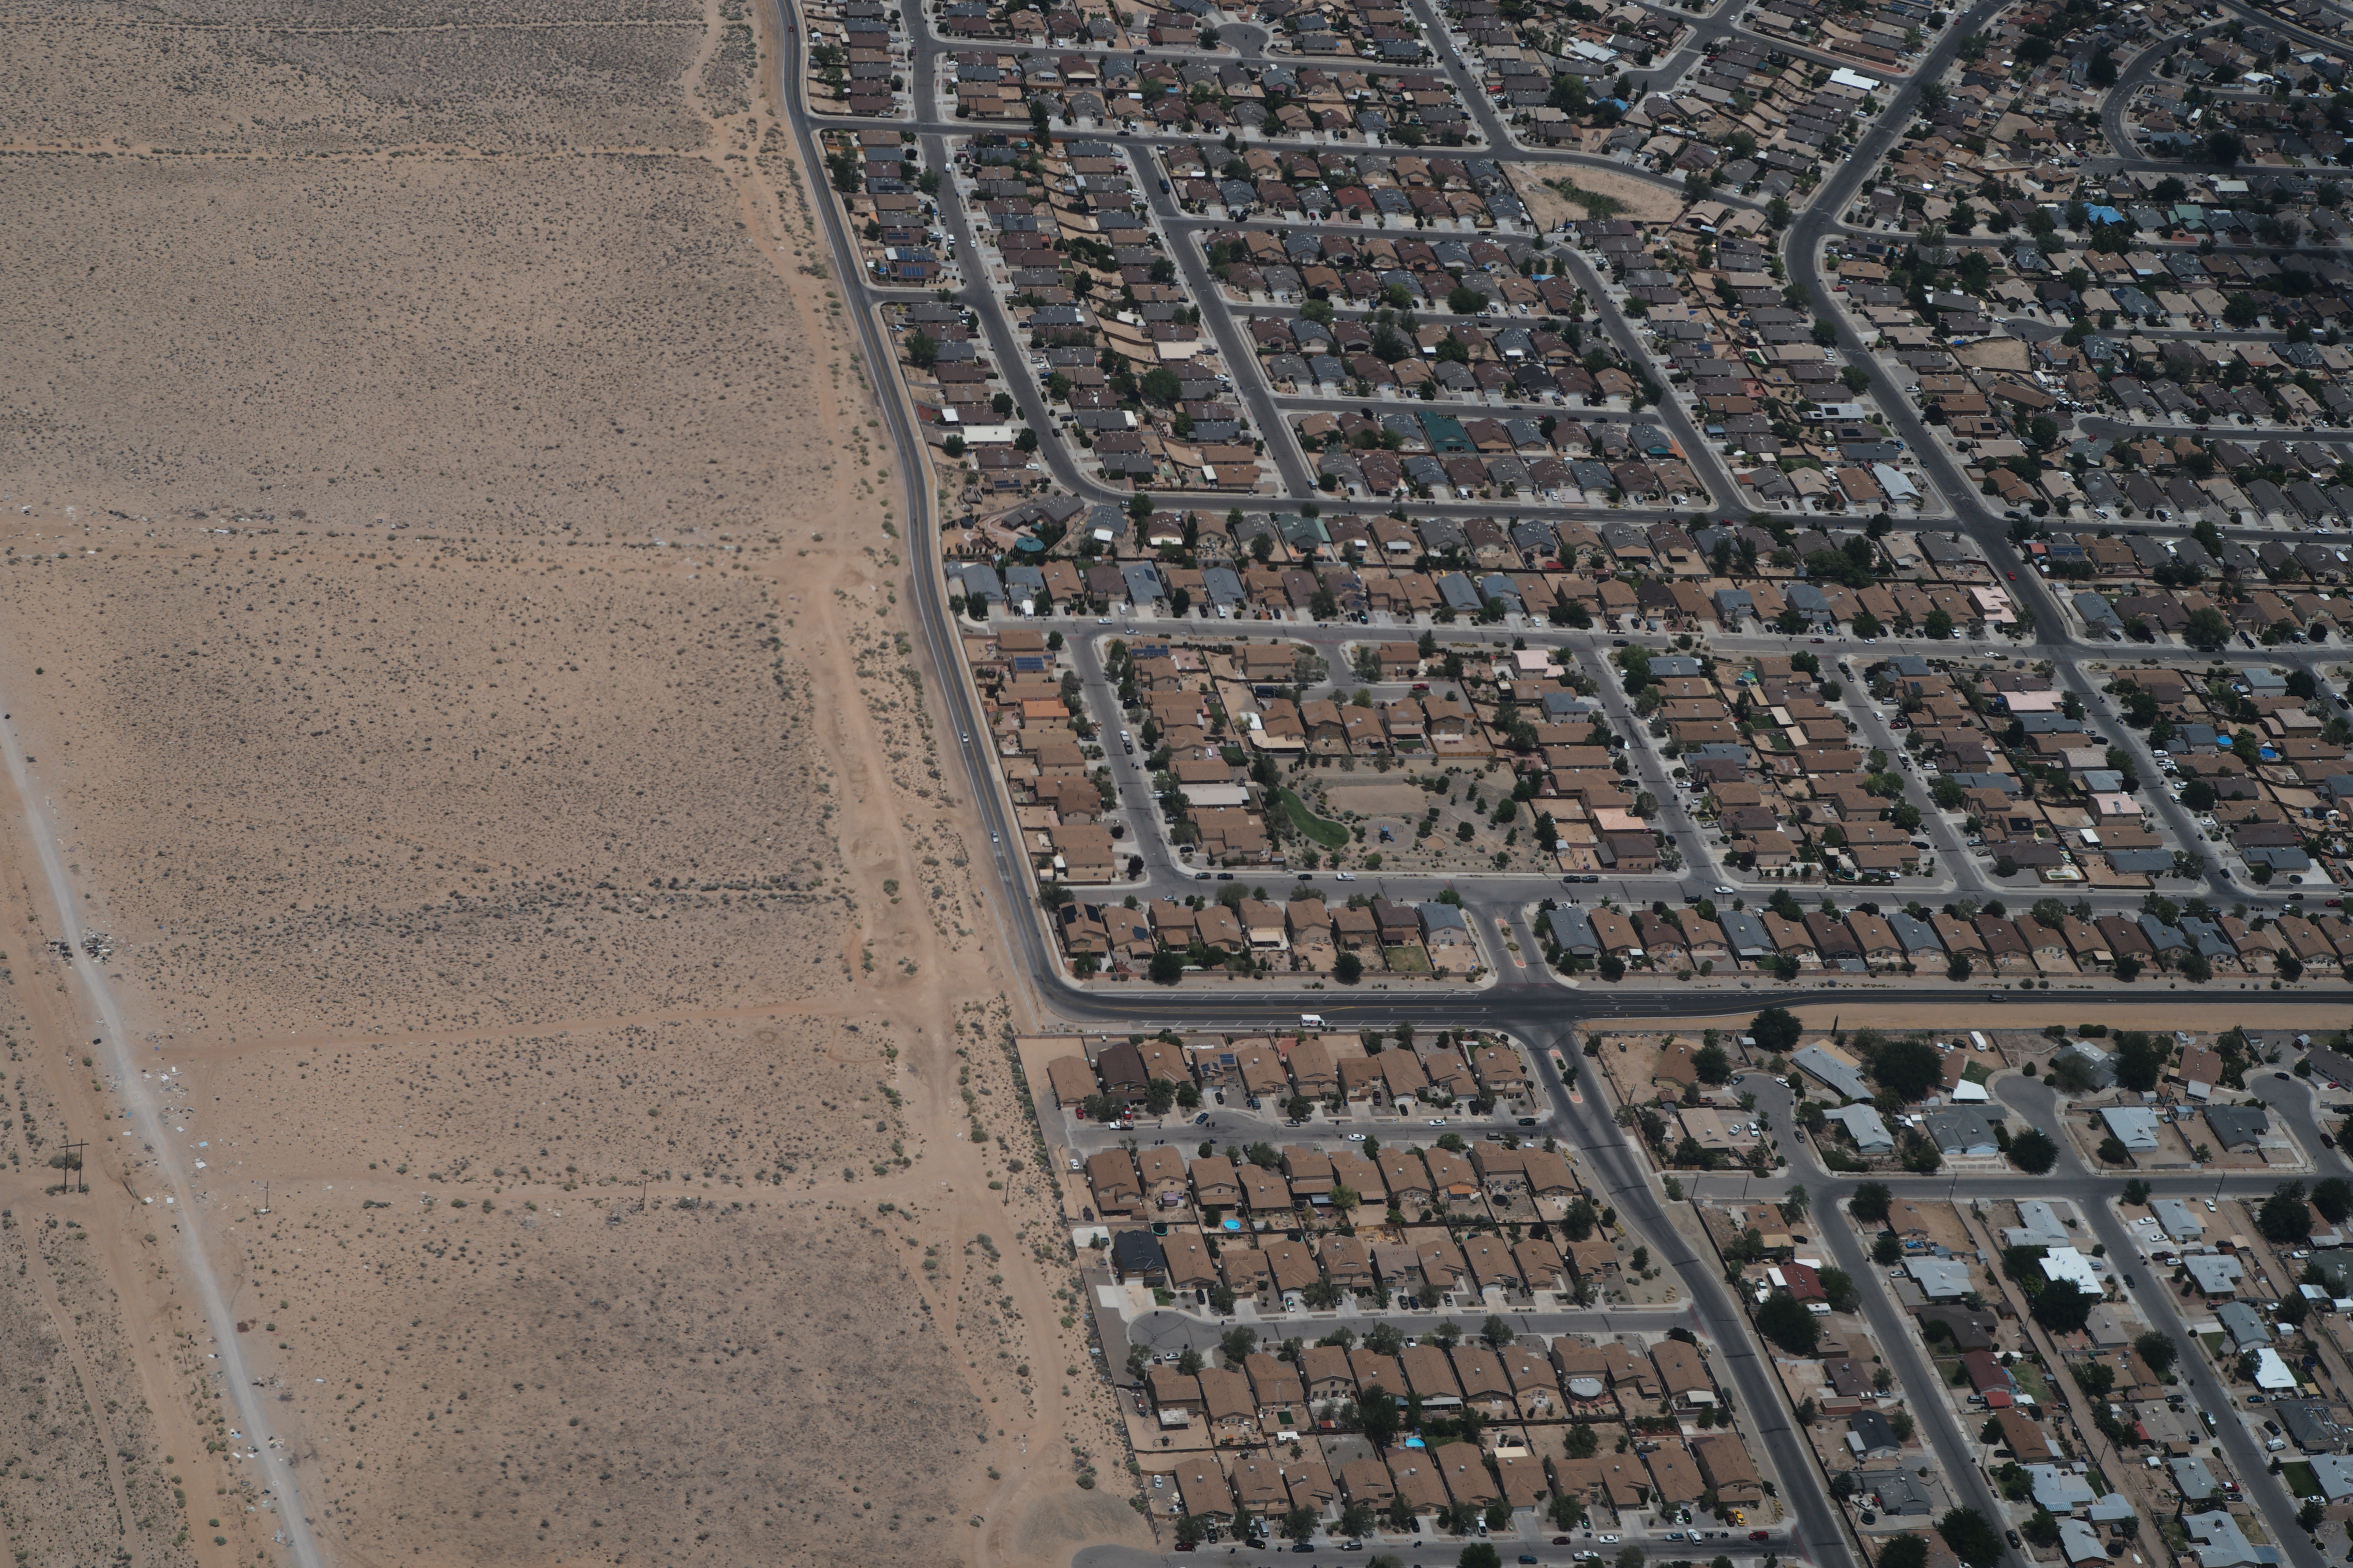 Houses reach the edge of the desert on the outskirts of Albuquerque